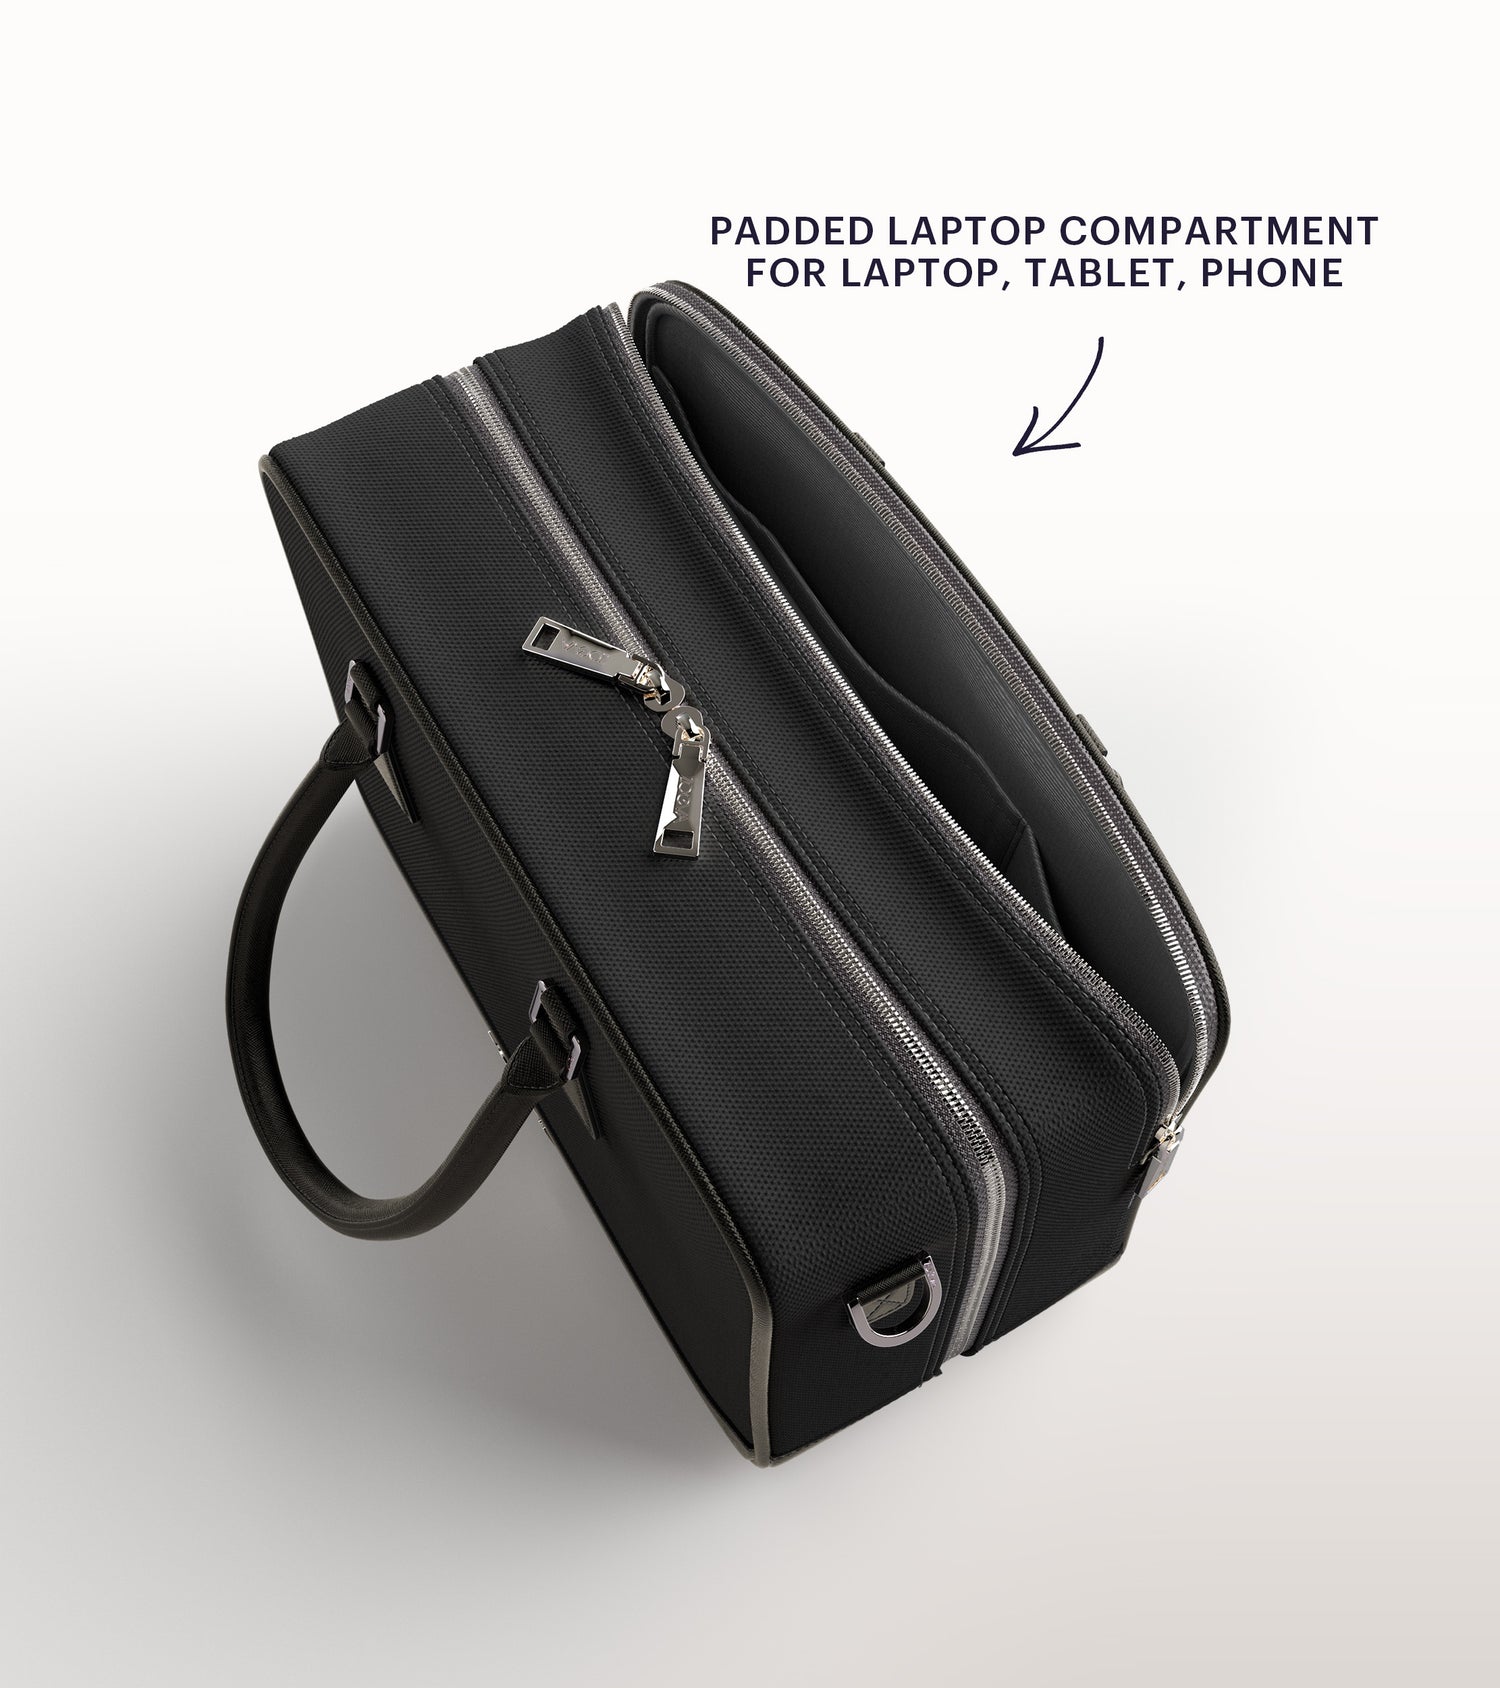 The Zoe Bag (Black) Main Image featured